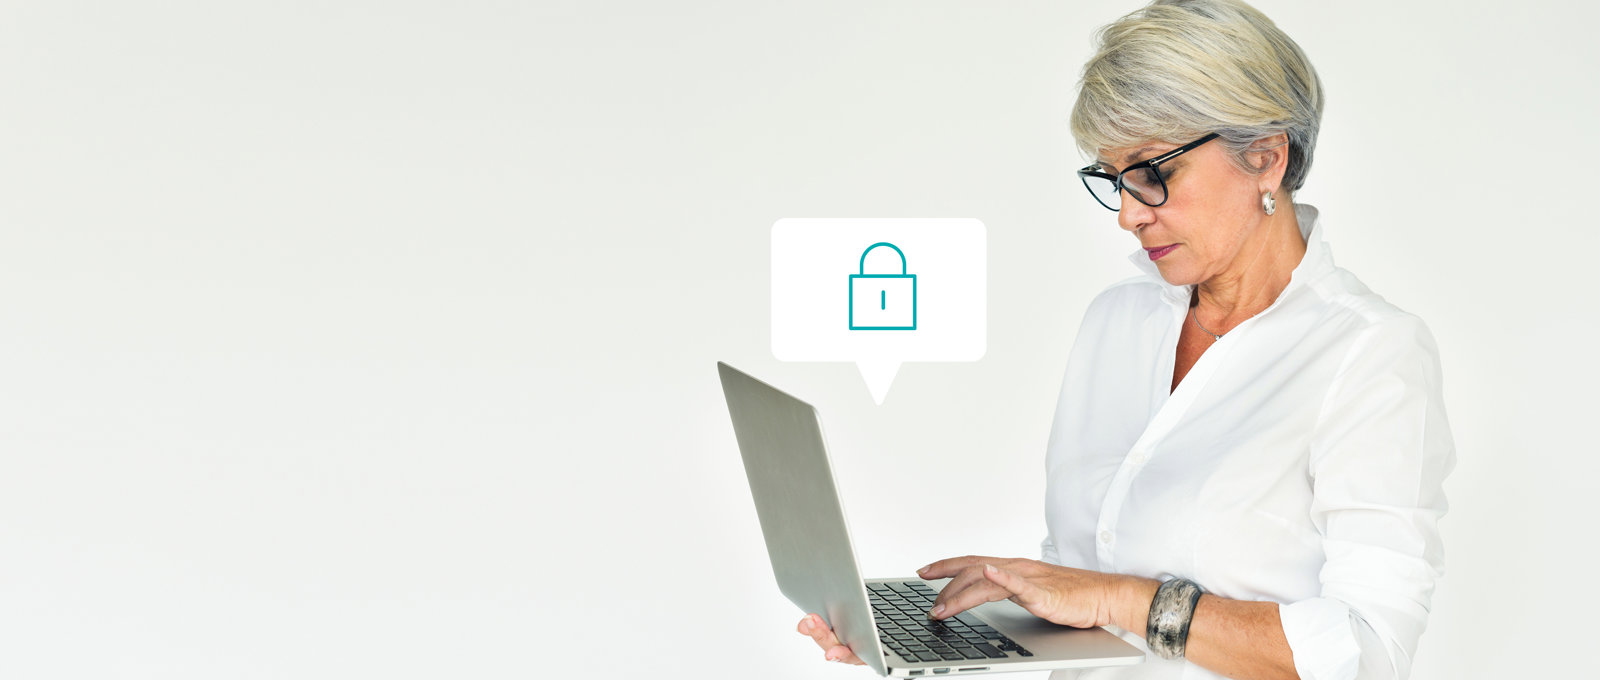 Photo of a woman holding a laptop. An icon of a padlock is floating above the keyboard